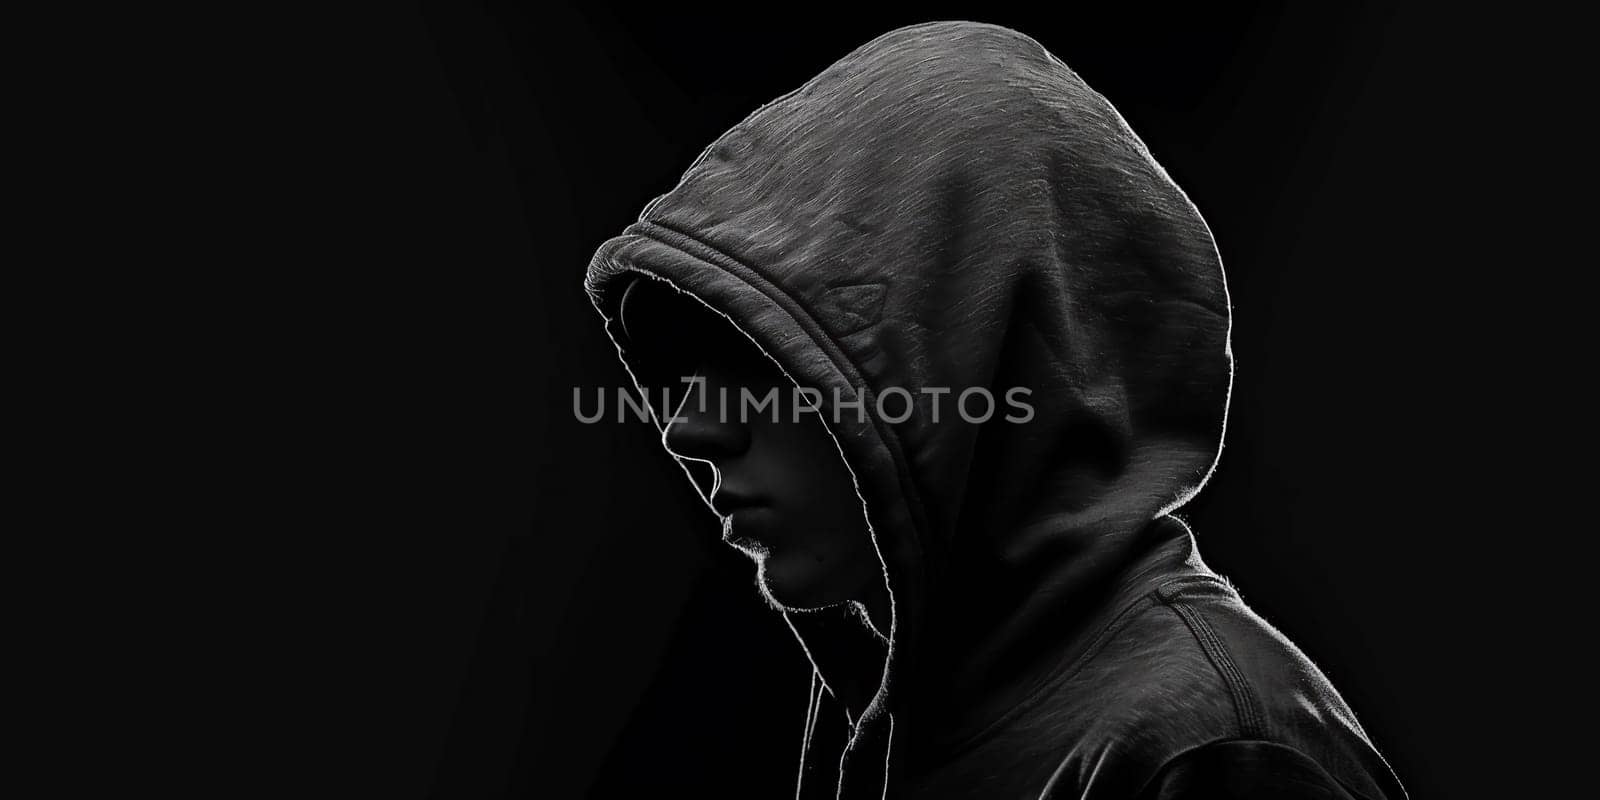 An adult online anonymous internet hacker with invisible face in urban environment and number codes illustration concept. High quality photo